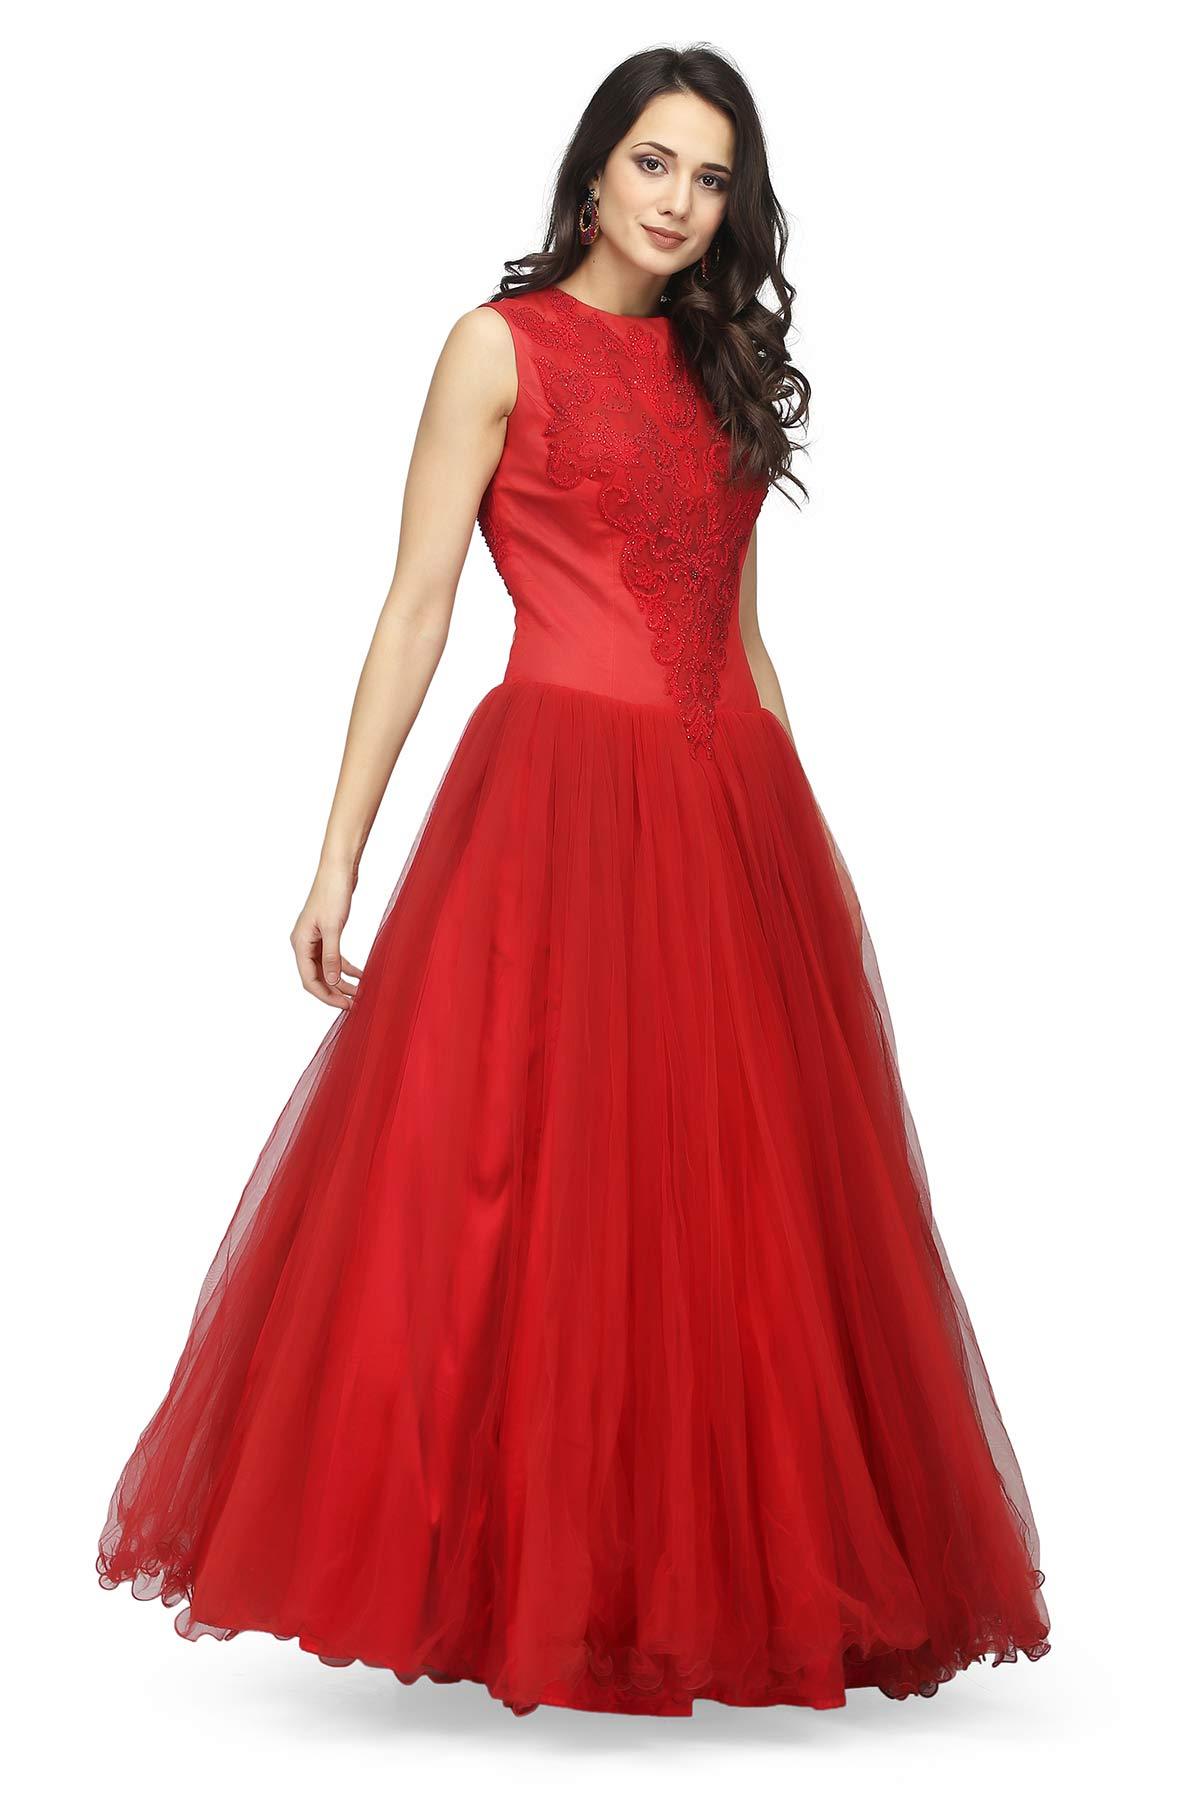 Red Off the Shoulder Sweet 16 Ball Gowns Ruffled Wedding Dresses with –  Viniodress